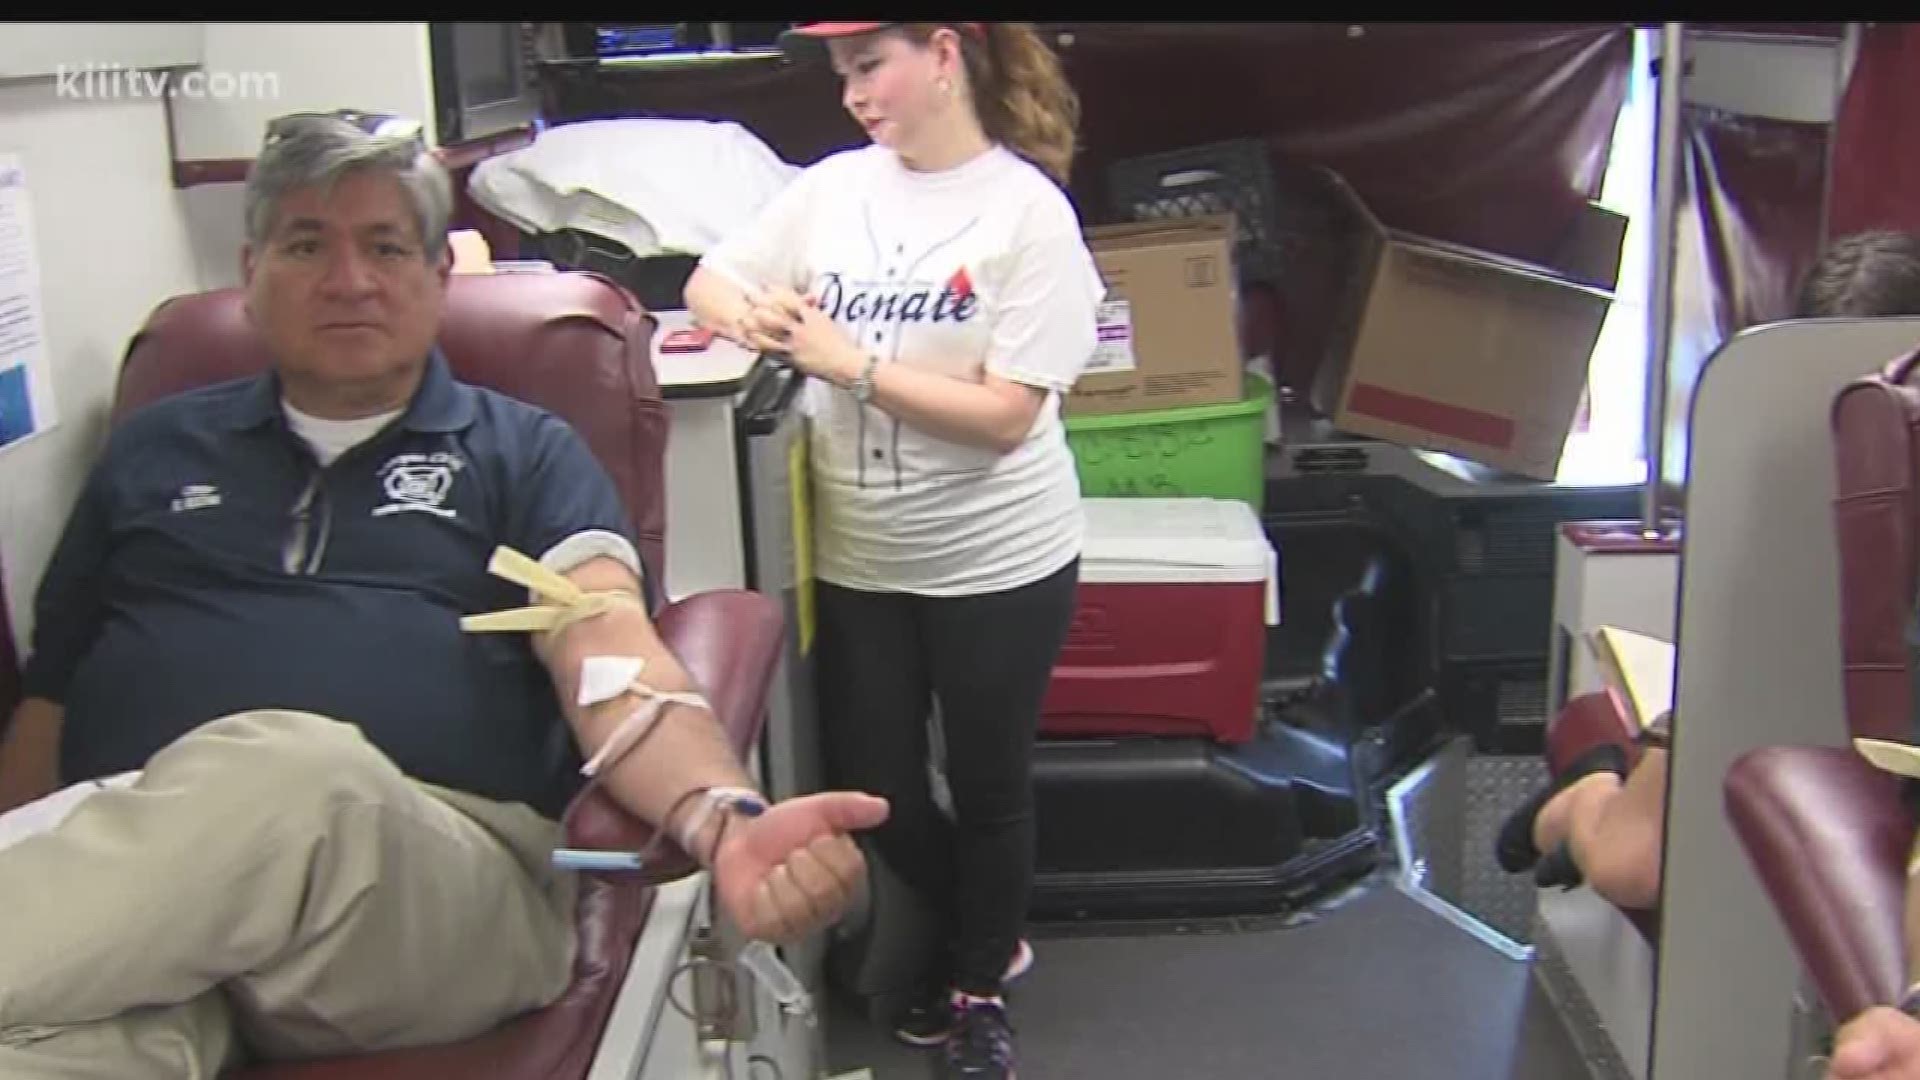 2018 marks the 16th annual Boots & Badges Blood Drive Challenge hosted by the Coastal Bend Blood Center.